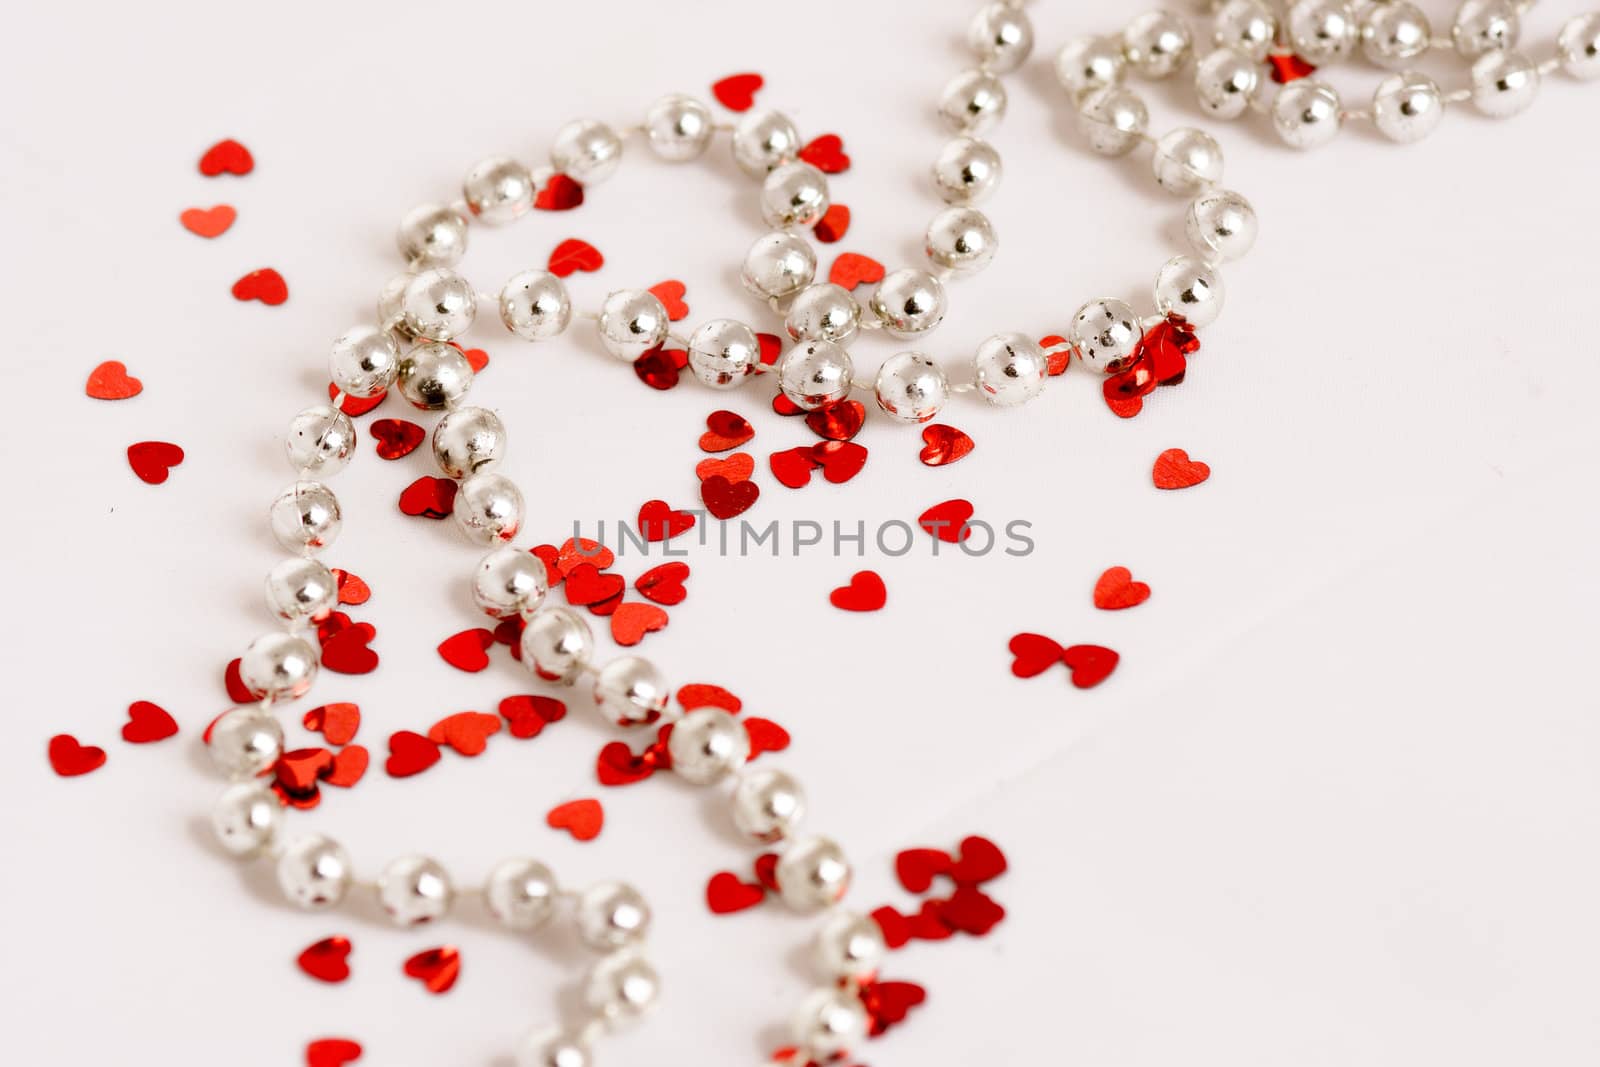 Red glitter hearts on a white background with pearls